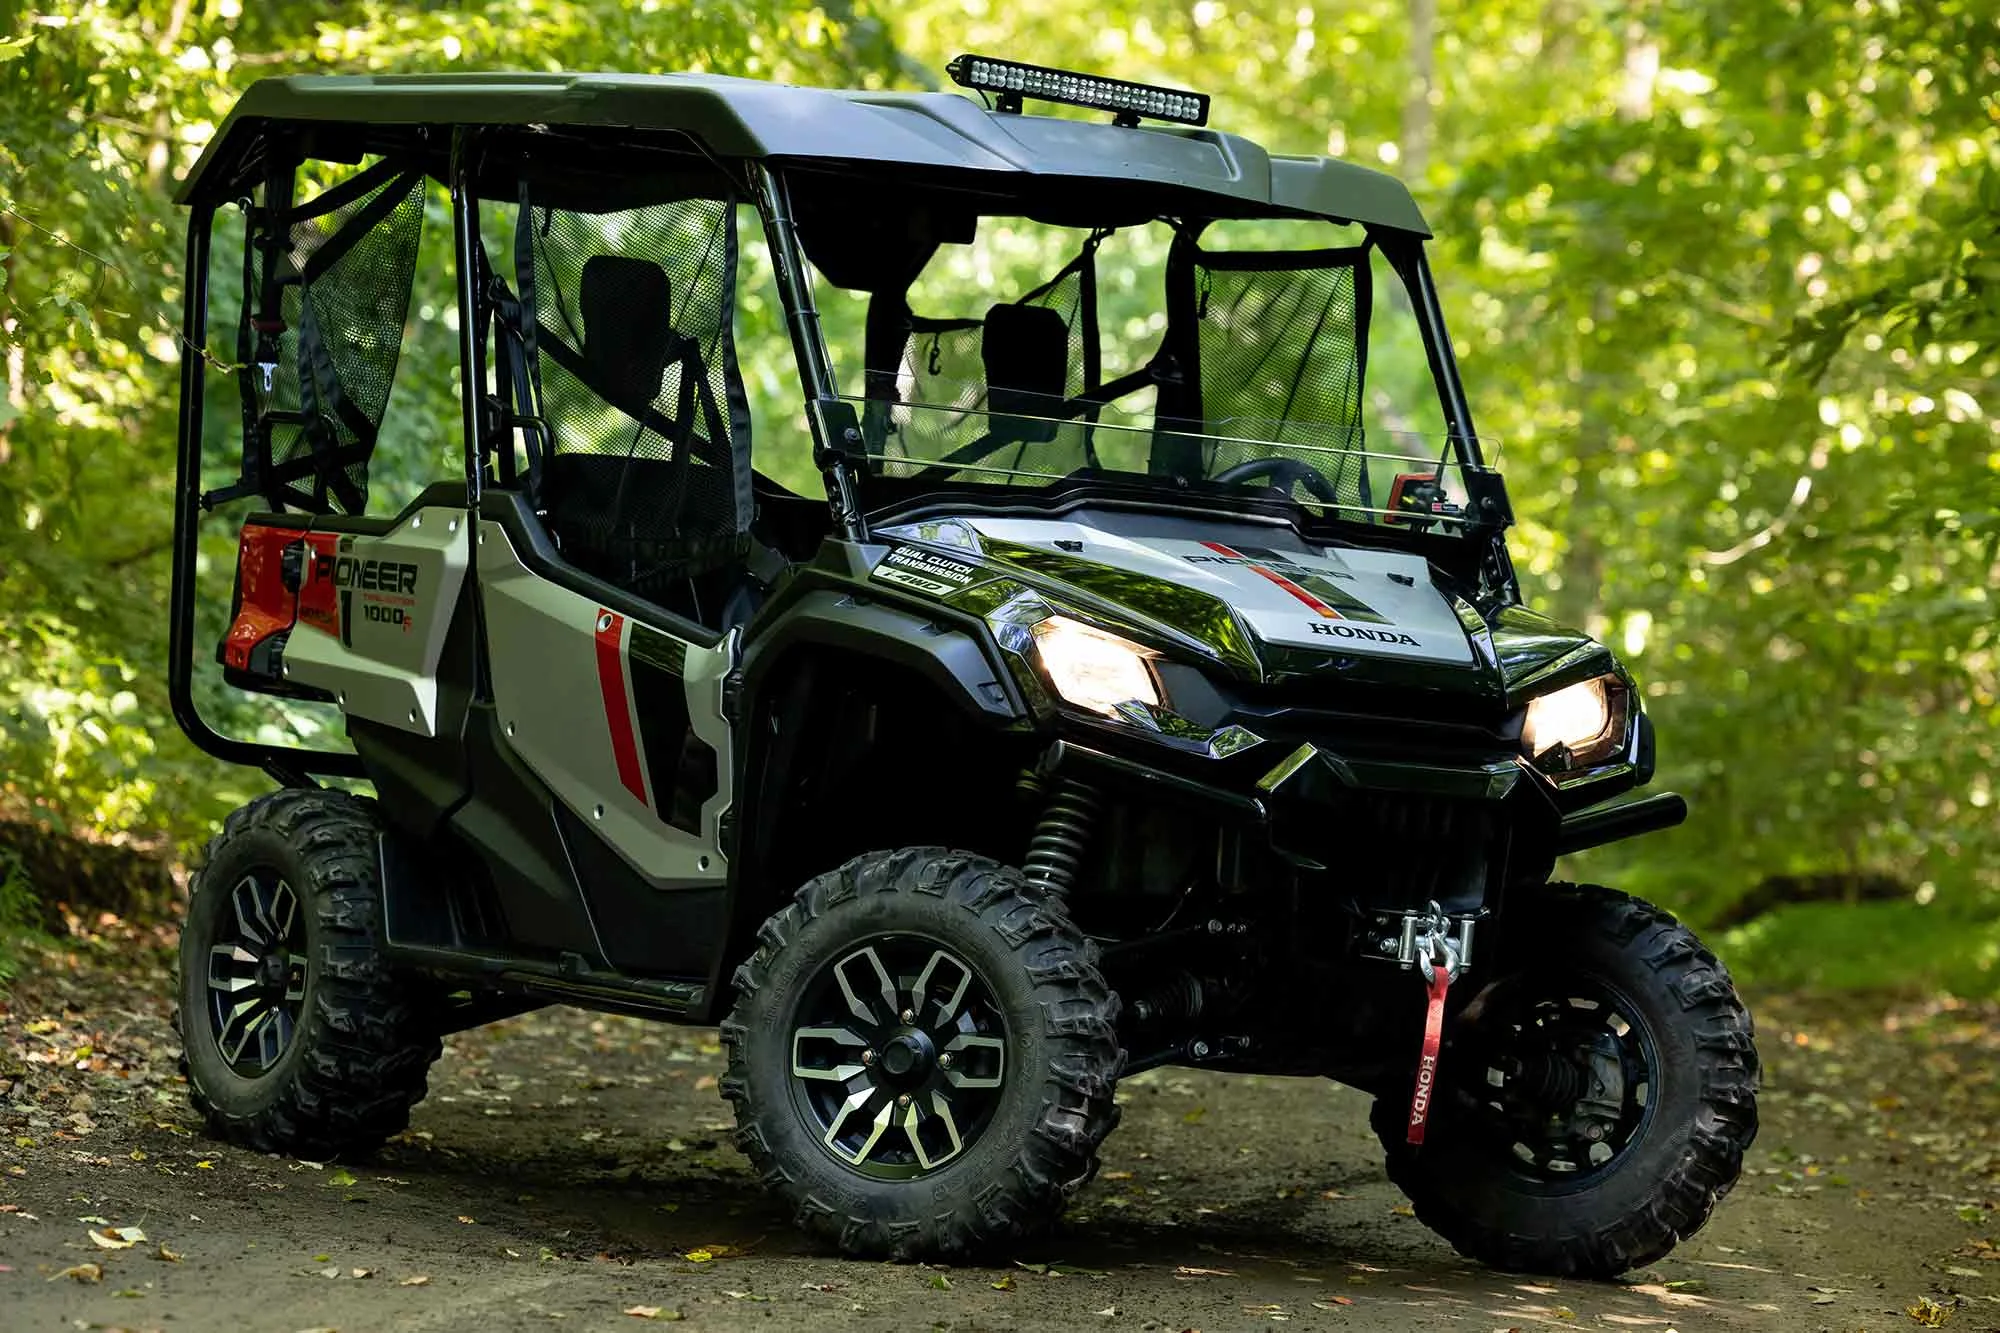 EXPLORE the area on a ATV, SXS, MOPED, SNOWMOBILE